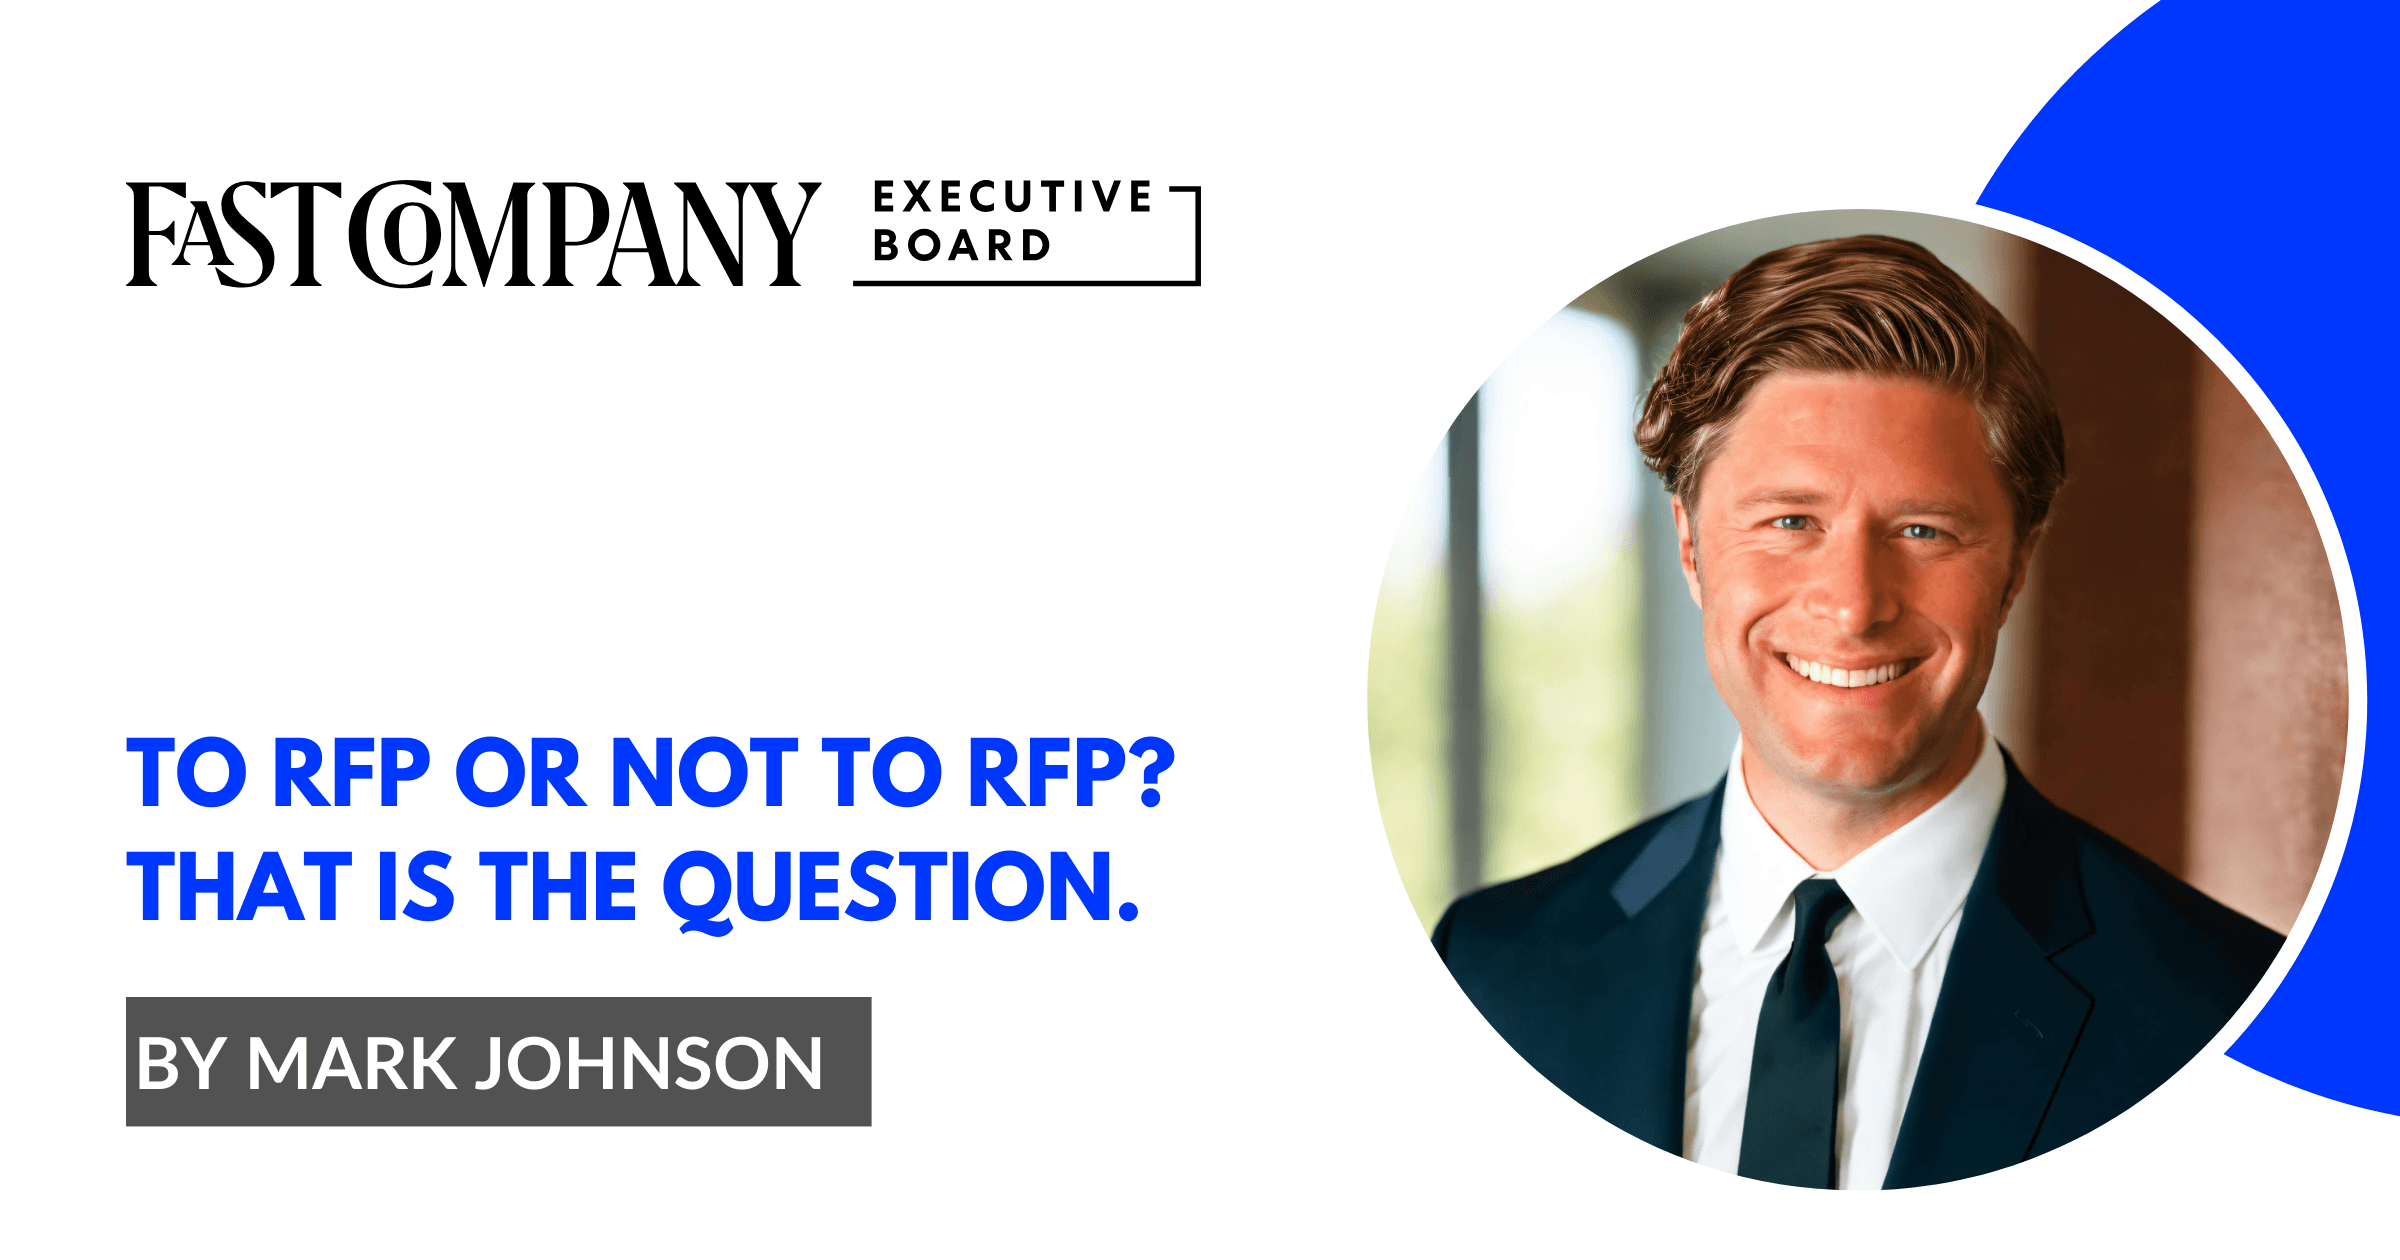 To RFP or not to RFP?